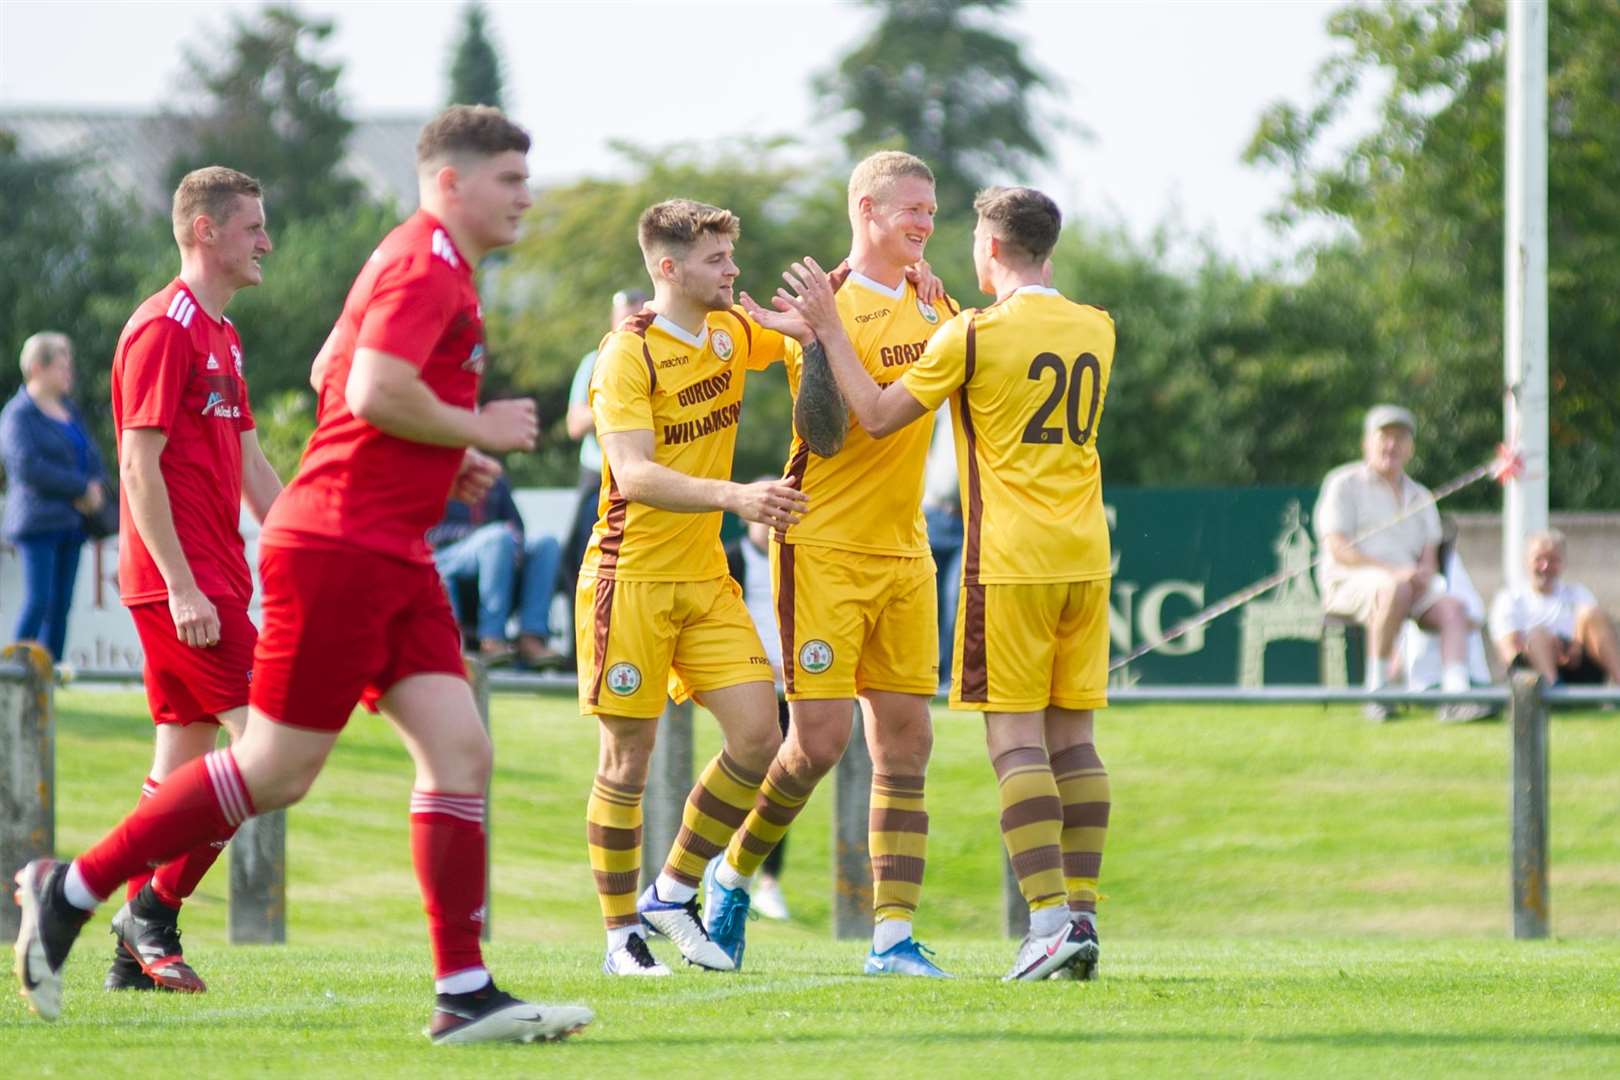 Forres frontman Lee Fraser celebrates with teammate Jack Grant and Dale Wood after he scored the only goal of the afternoon. ..Forres Mechanics FC (1) vs Lossiemouth FC (0) - Highland Football League - Mosset Park, Forres 28/08/2021...Picture: Daniel Forsyth..